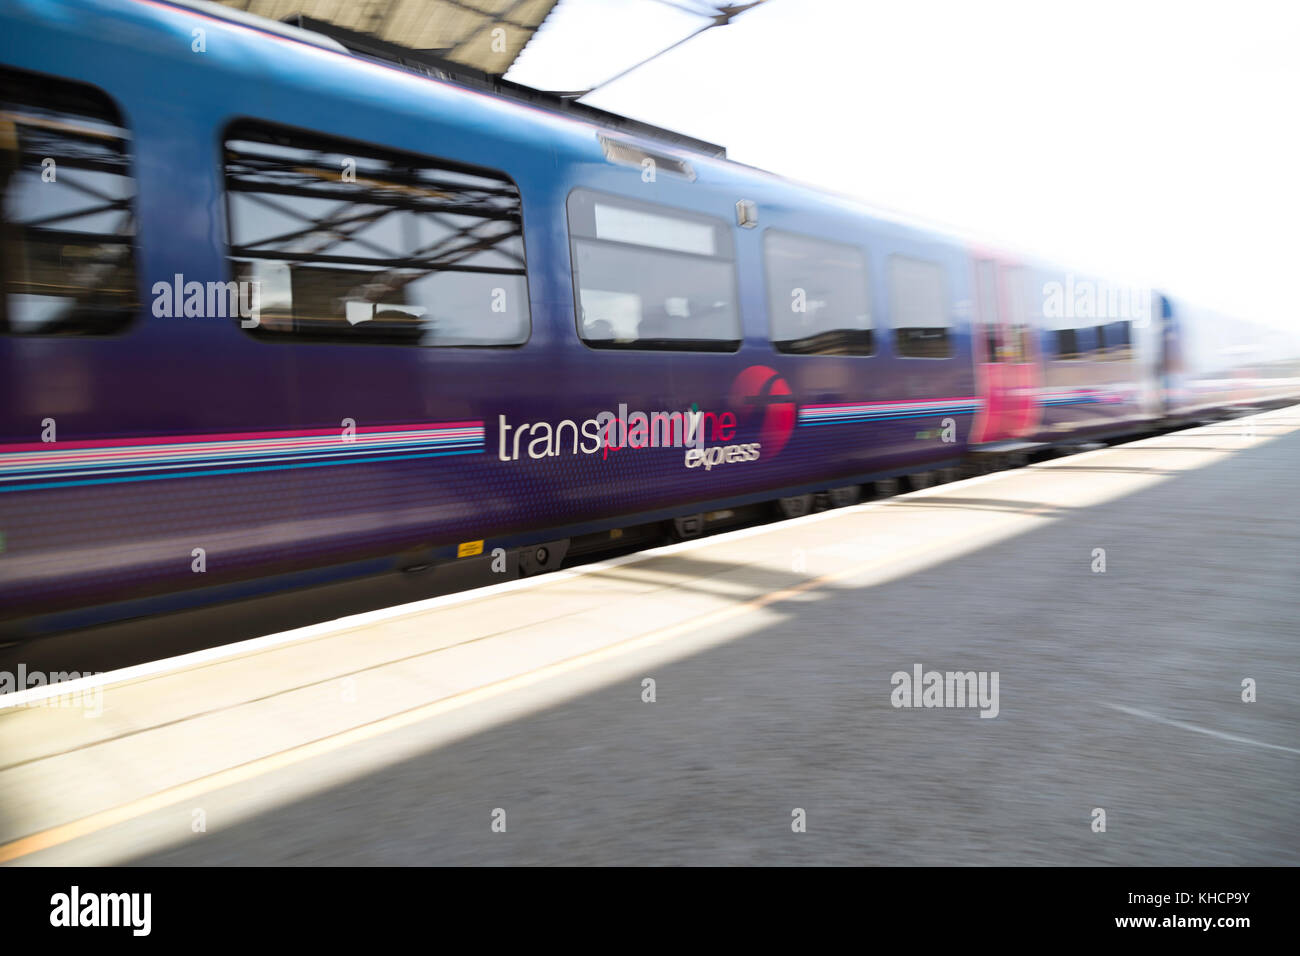 Trans Pennine express signage on train at Huddersfield station. Stock Photo